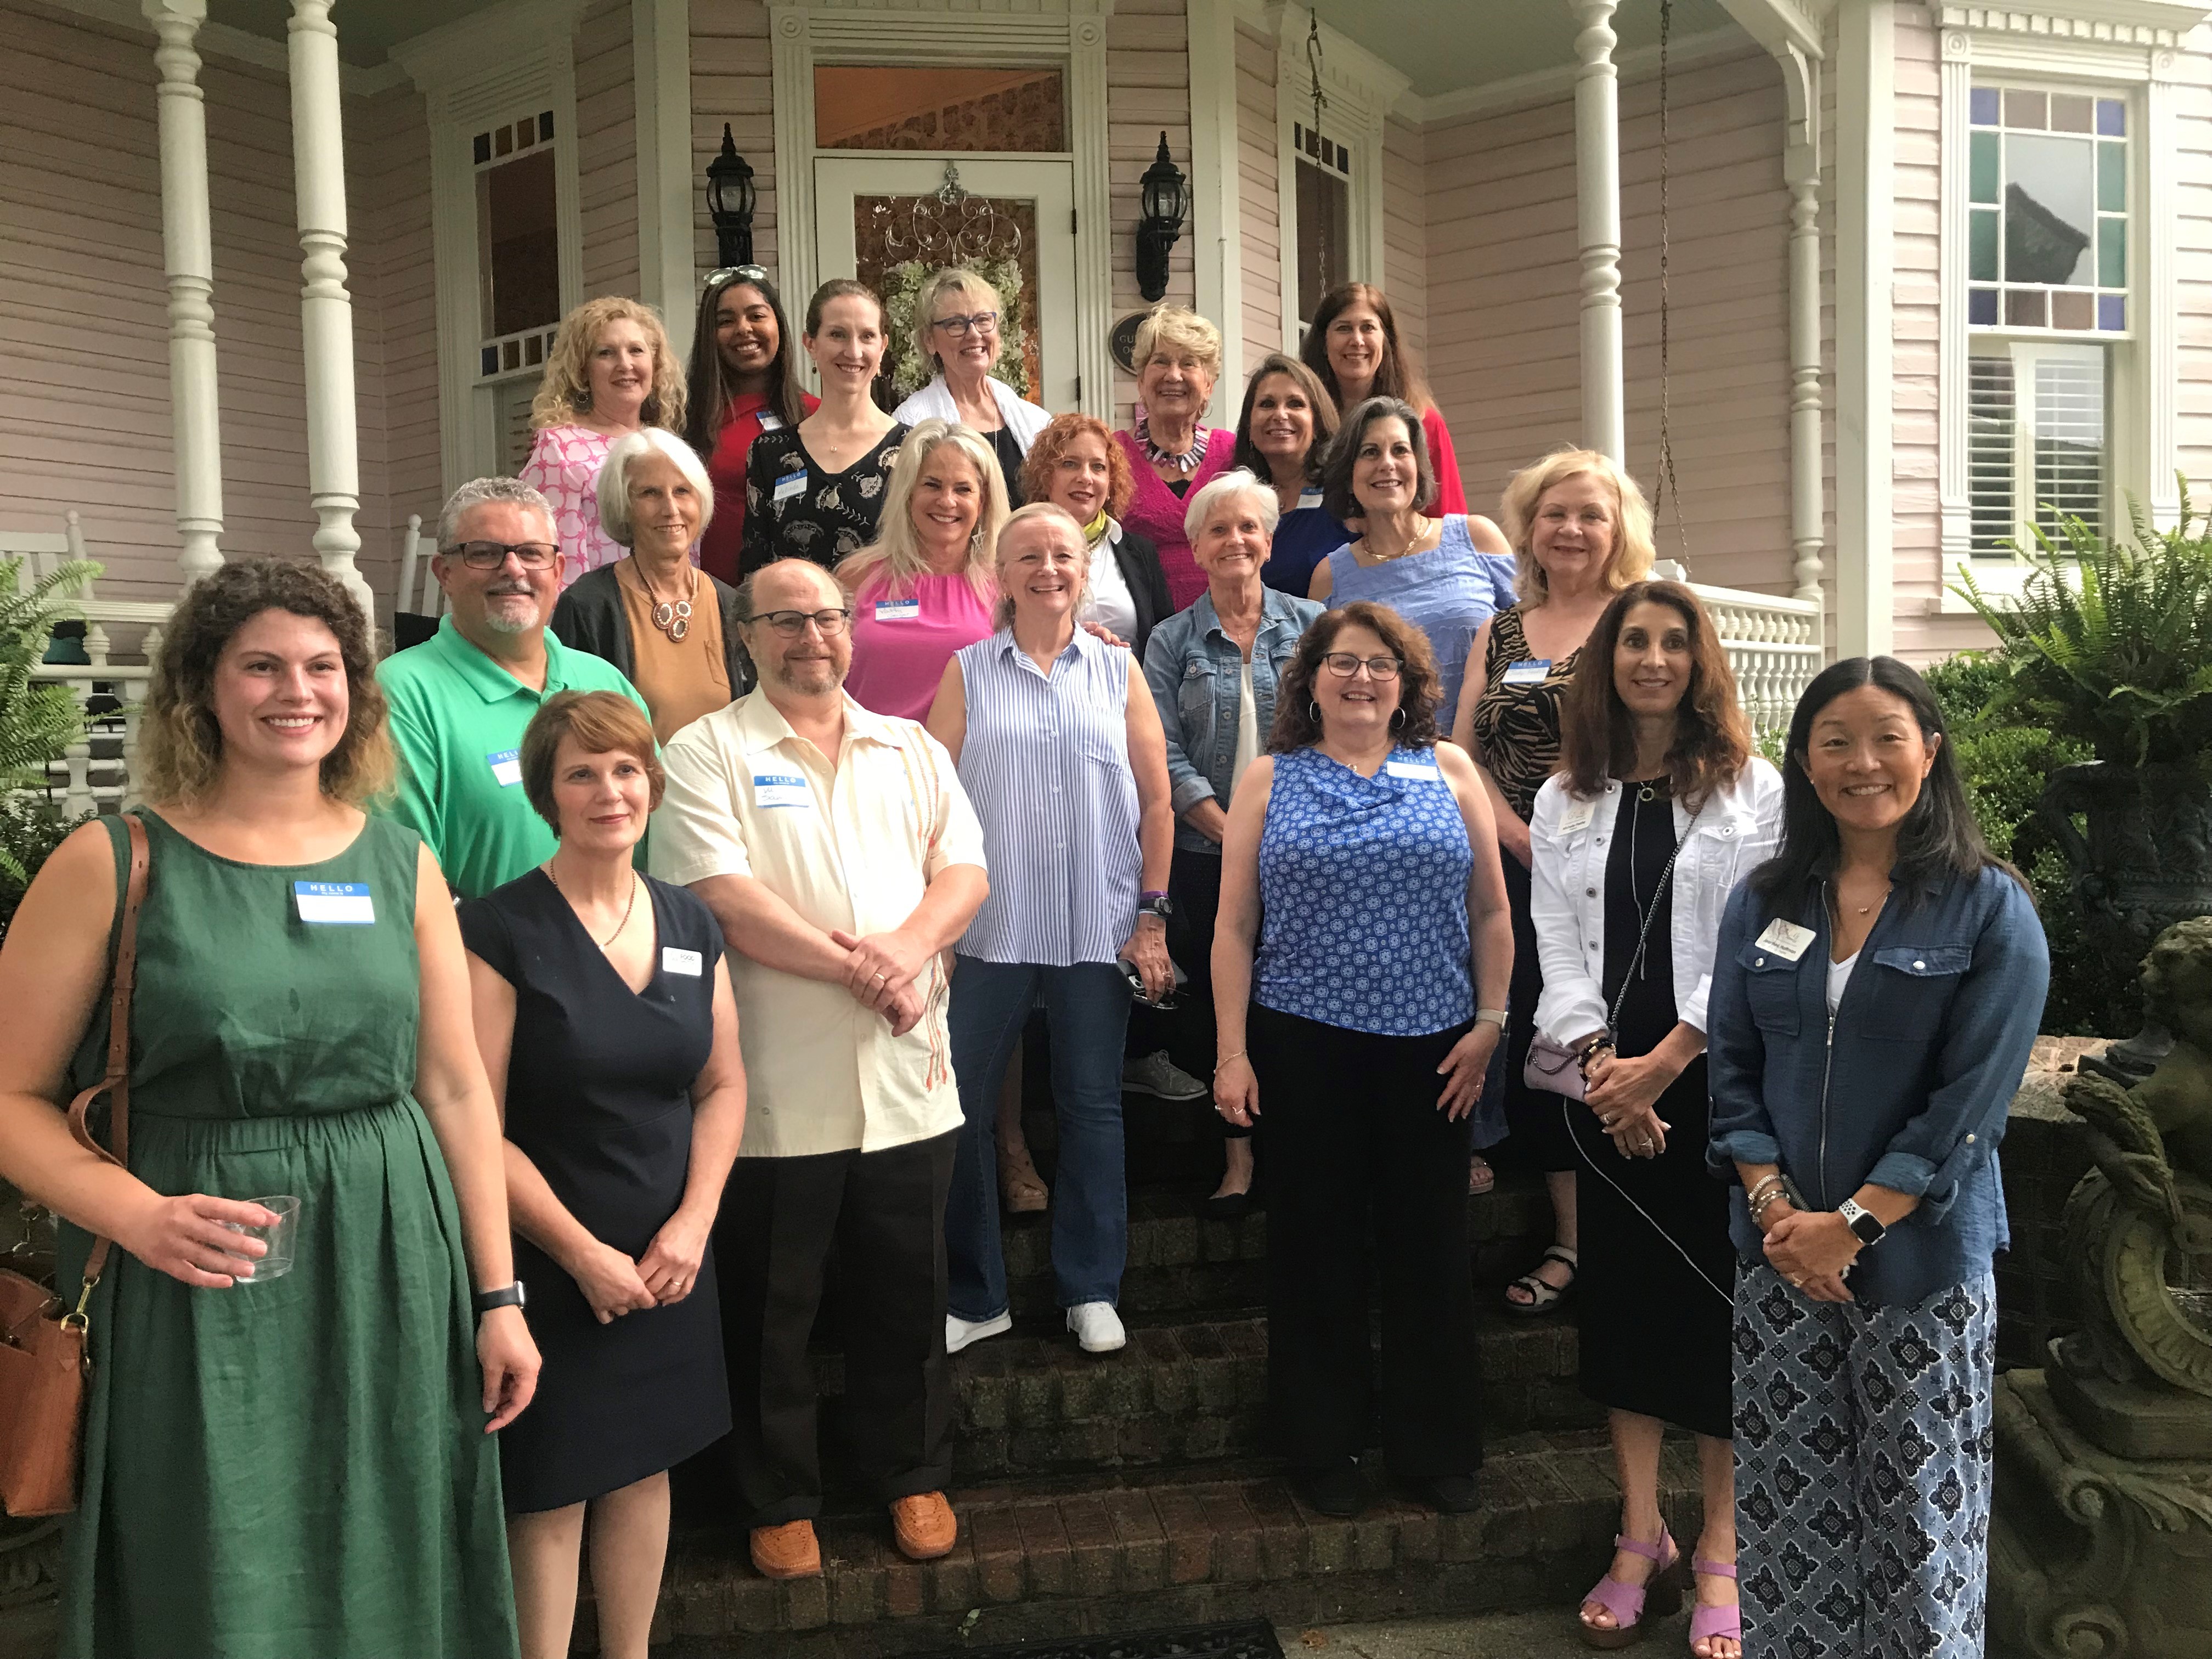 Members of the Cary Women's Giving Network pictured with local nonprofit leaders